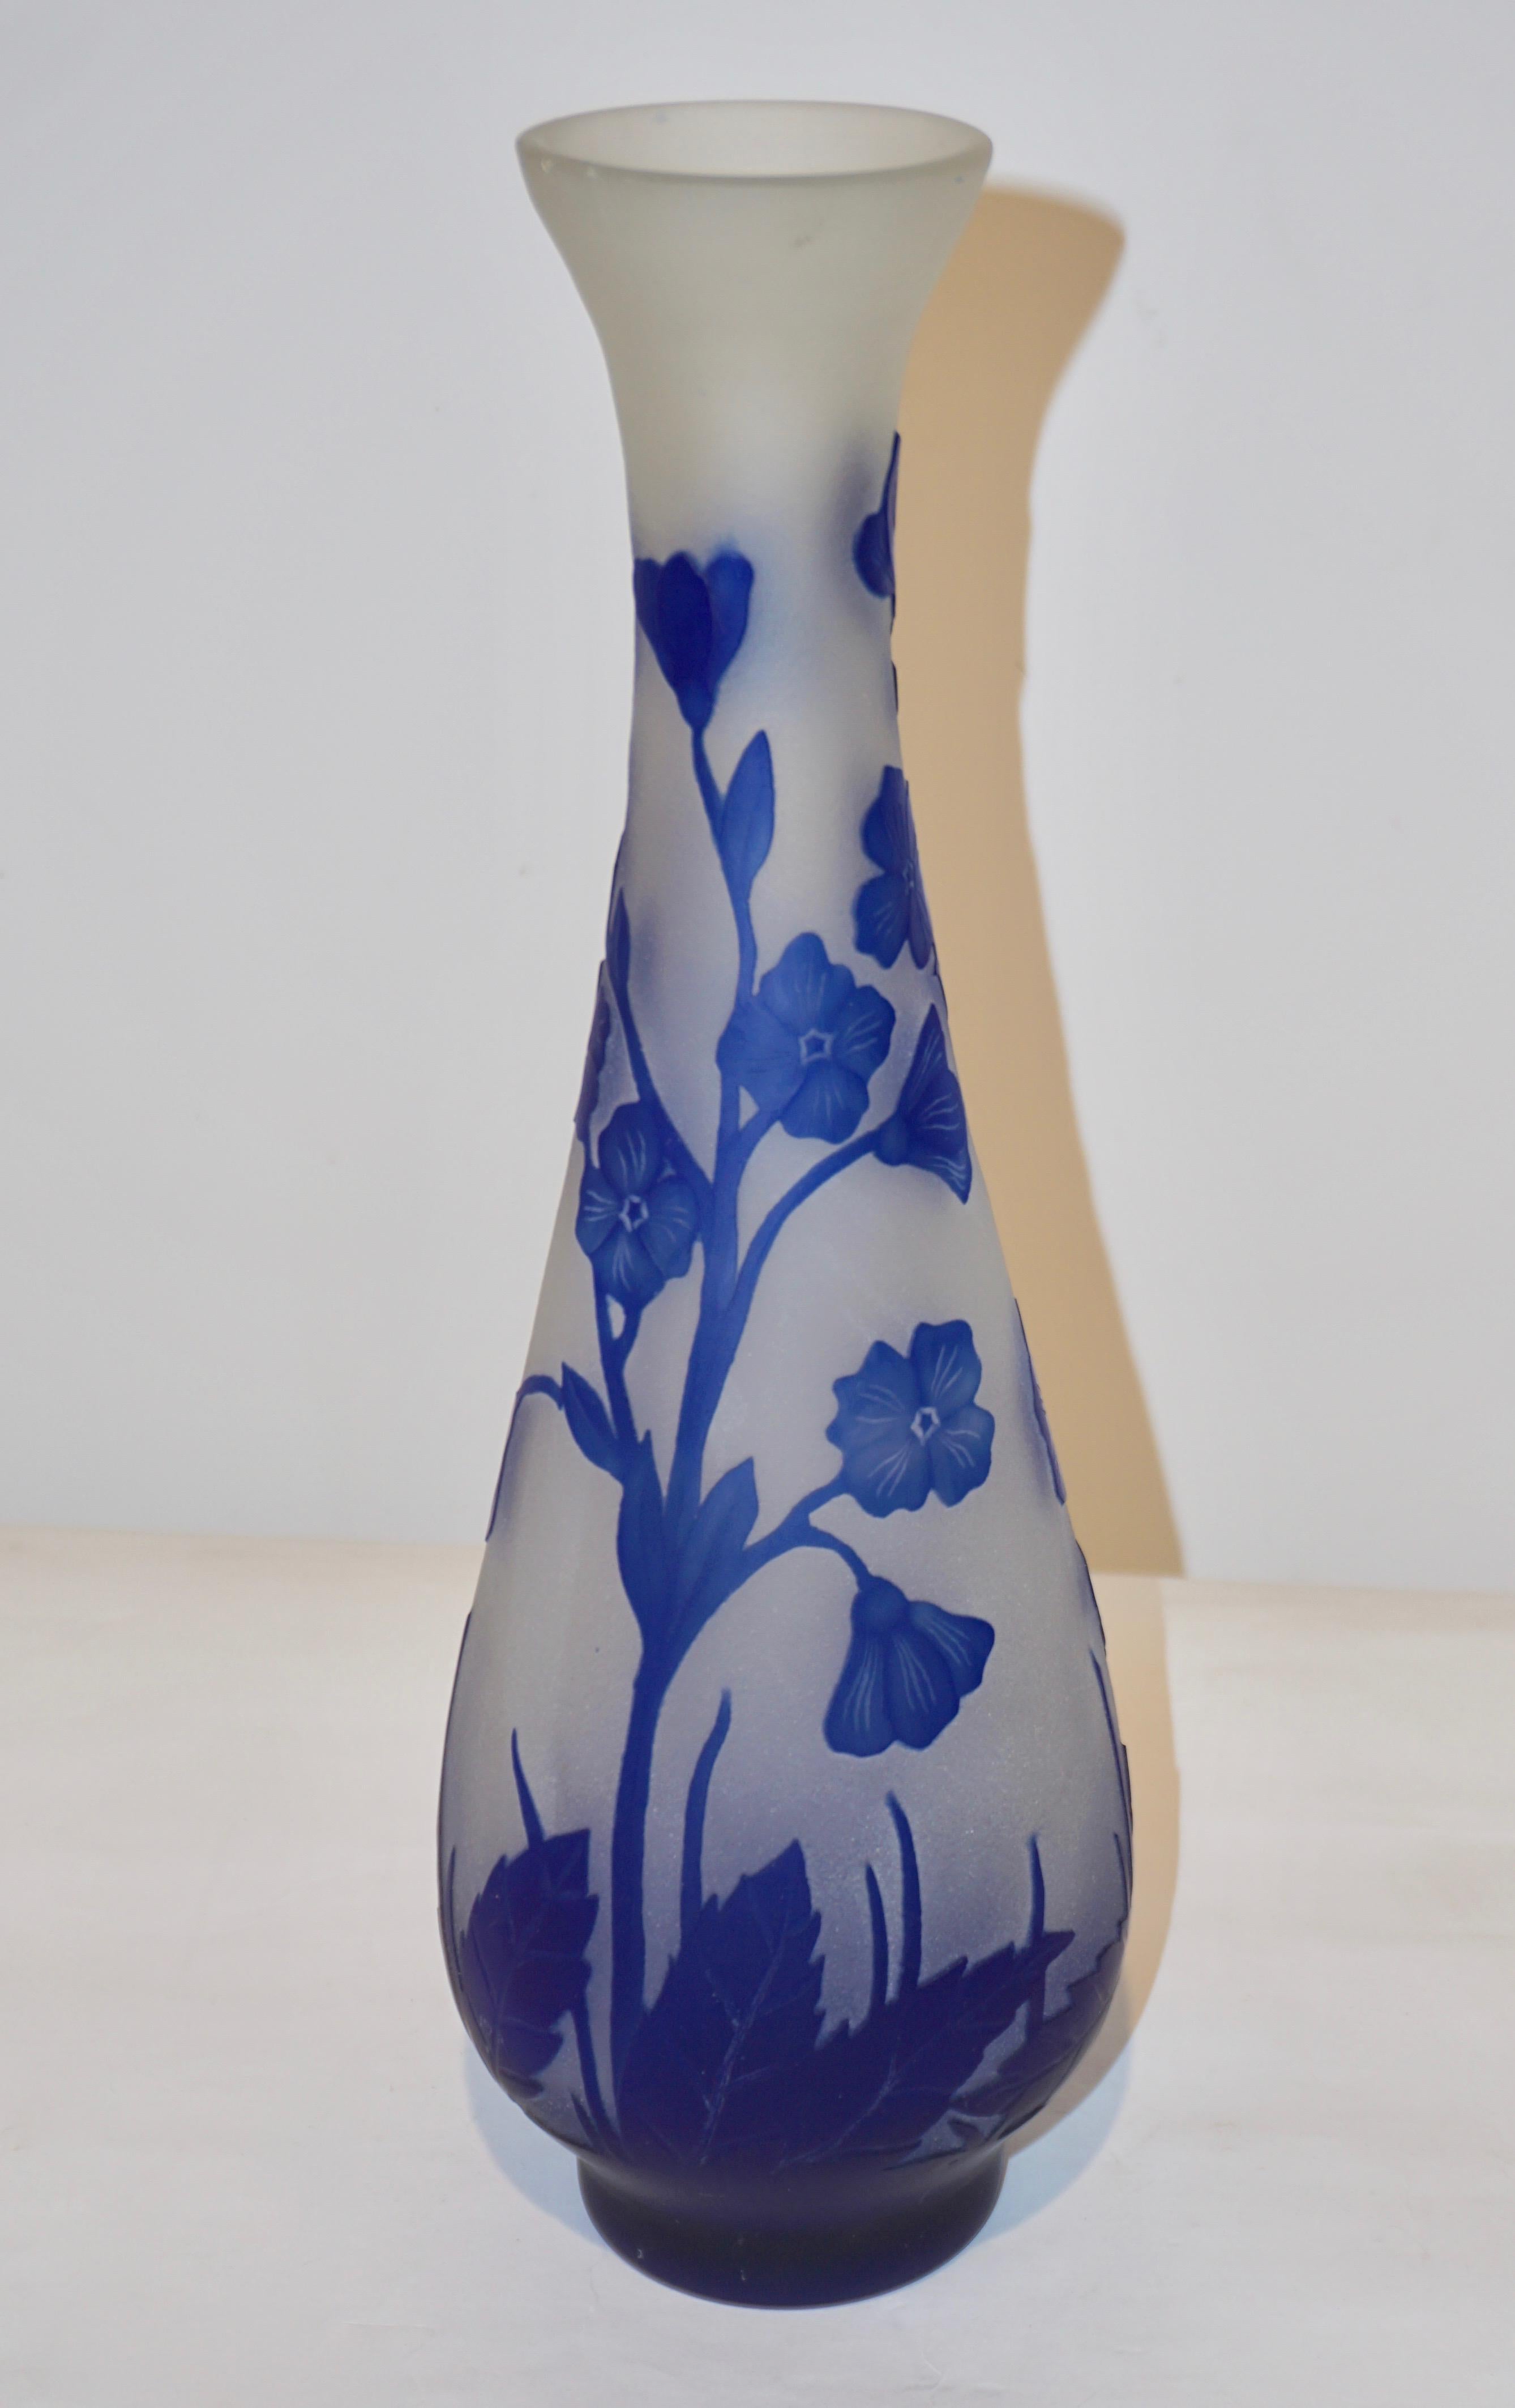 1970s very decorative tall vintage centerpiece glass vase, entirely handmade by artist Michna, handcrafted in crystal pâte de verre and exclusive Art Nouveau decor realized with the acid-etched technique: the clear pâte de verre is cased within